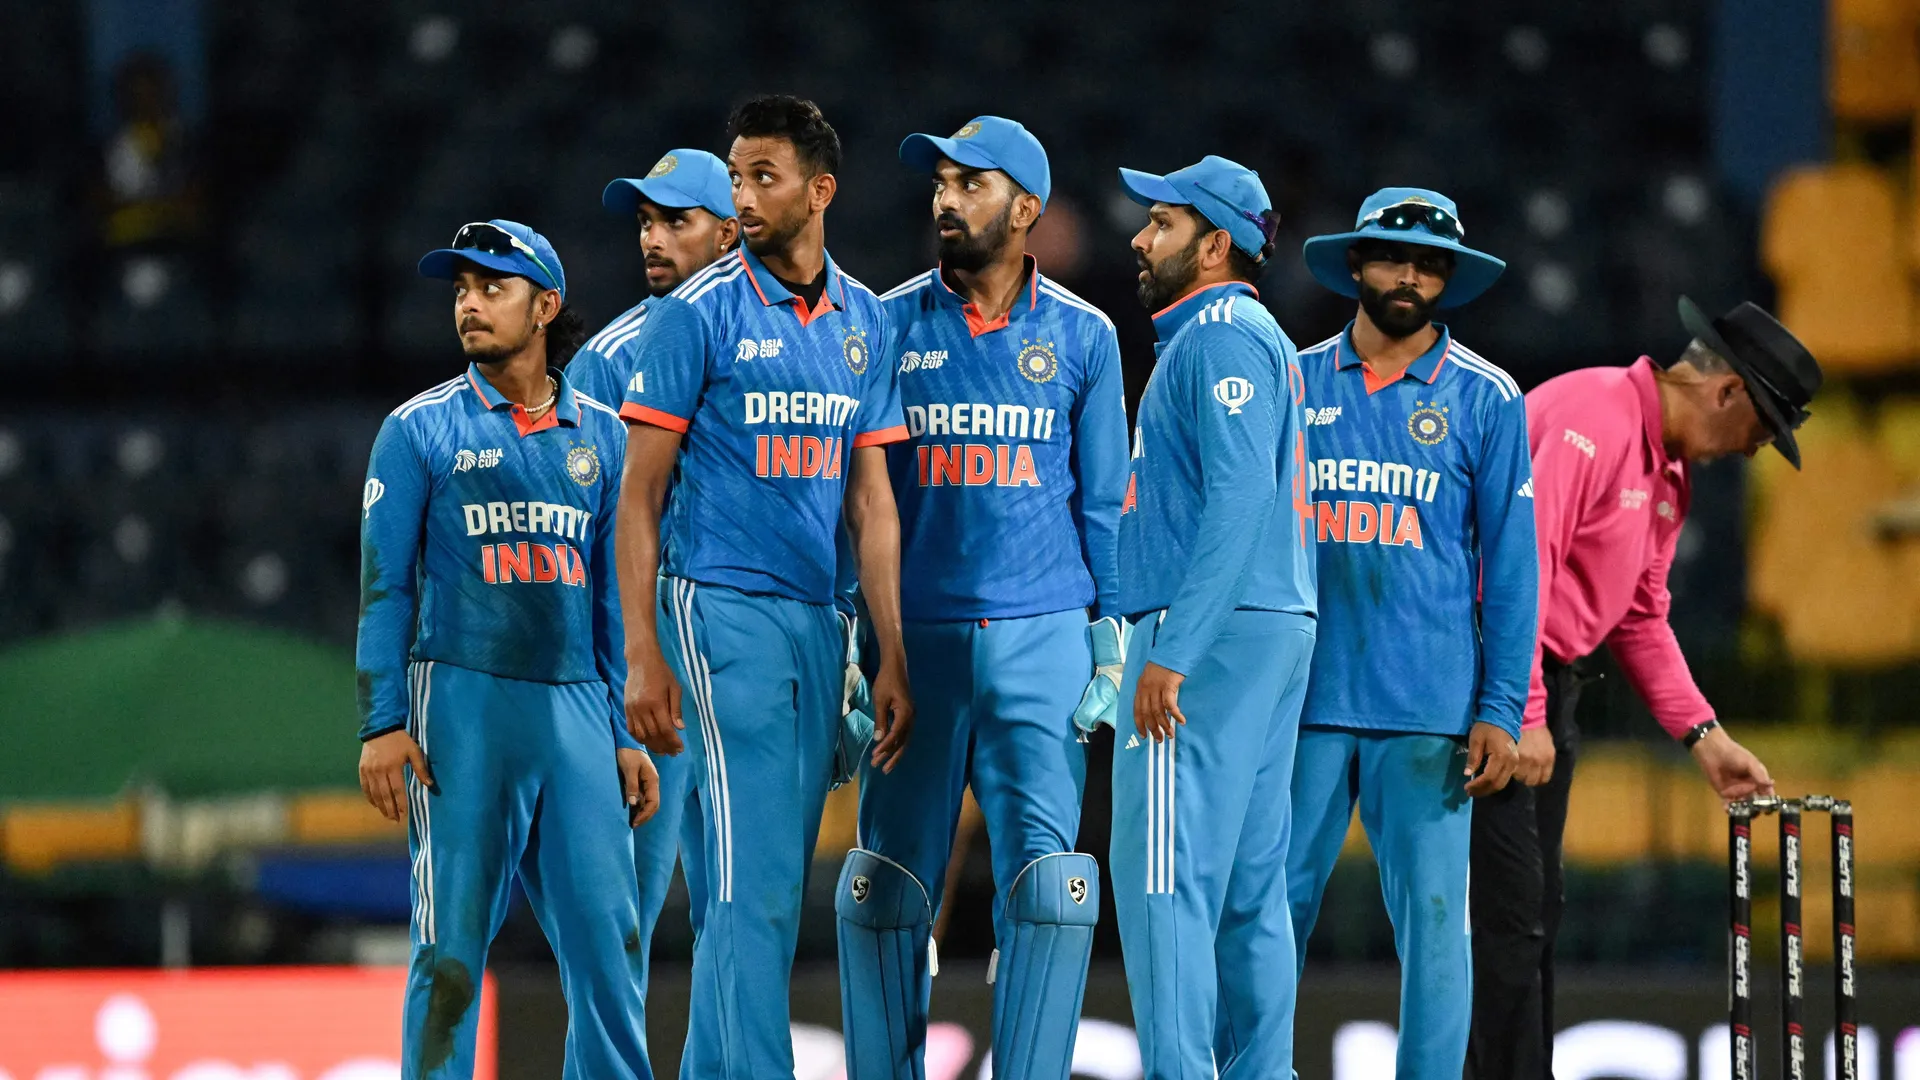 After losing to Bangladesh in the Asia Cup, India loses its chance to be No. 1 in all forms.